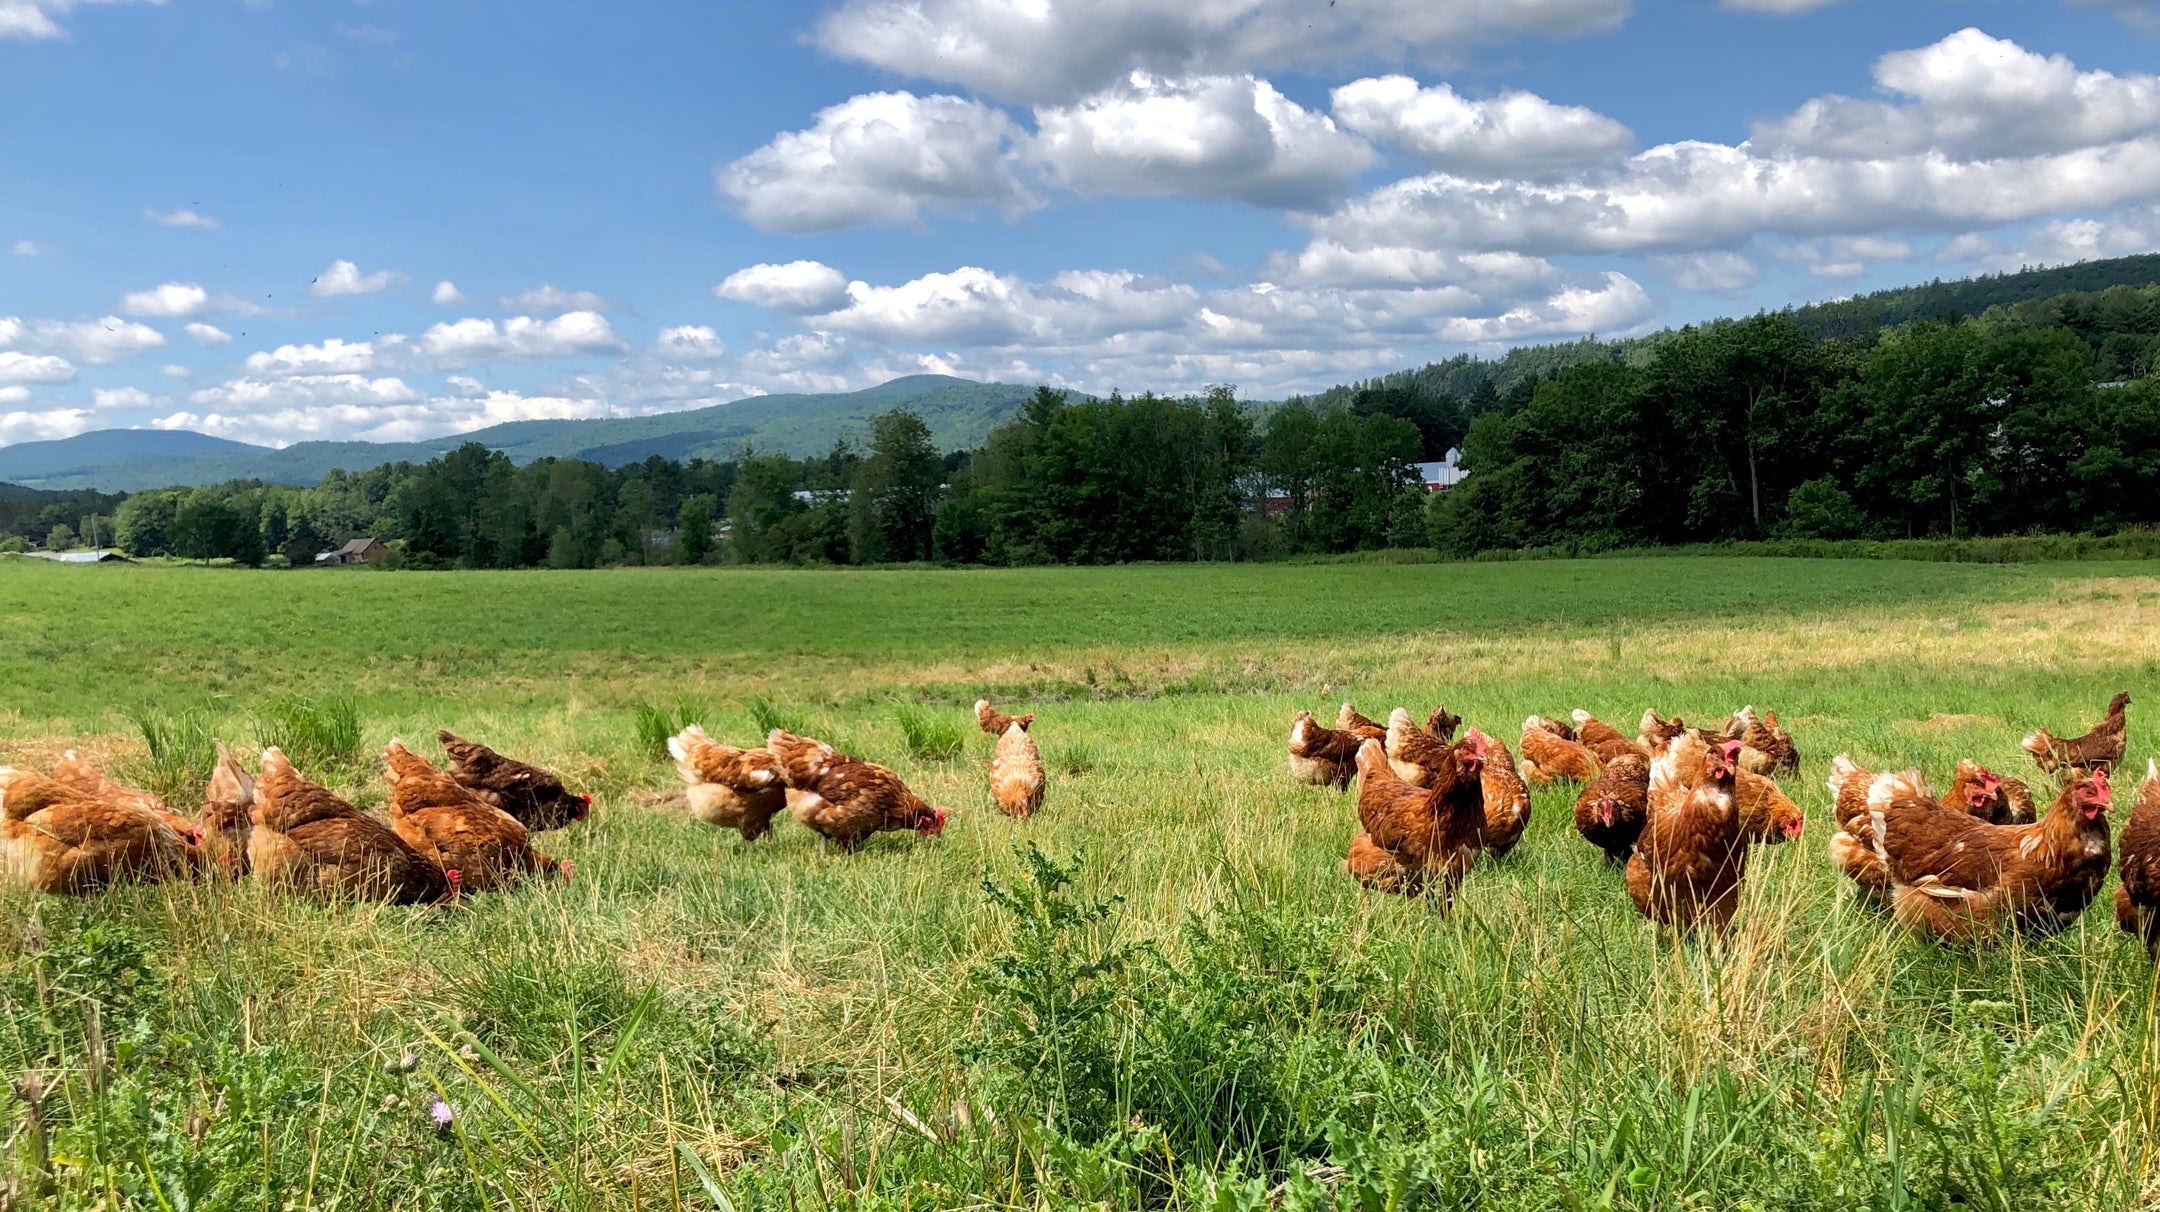 A flock of brown chickens in a field of grass